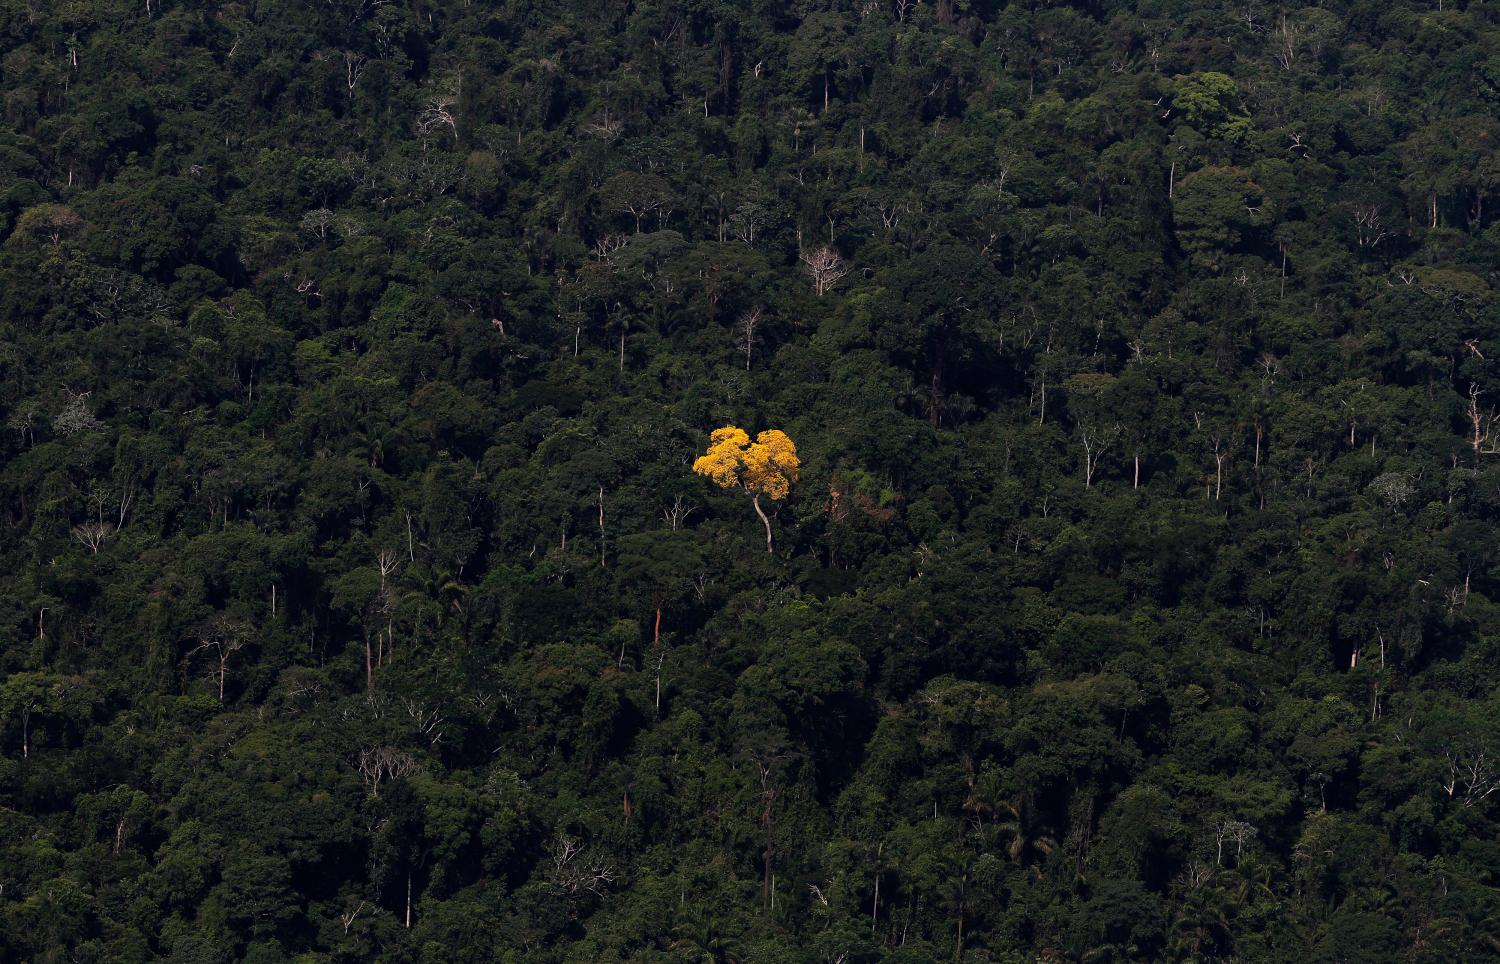 An ipe (lapacho) tree is seen in this aerial view of the Amazon rainforest near the city of Novo Progresso, Para State, September 24, 2013. The Amazon rainforest is being eaten away at by deforestation, much of which takes place as areas are burnt by large fires to clear land for agriculture. Initial data from Brazil's space agency suggests that destruction of the vast rainforest - the largest in the world - spiked by more than a third over the past year, wiping out an area more than twice the size of the city of Los Angeles. If the figures are borne out by follow-up data, they would confirm fears of scientists and environmental activists who warn that farming, mining and Amazon infrastructure projects, coupled with changes to Brazil's long-standing environmental policies, are reversing progress made against deforestation. Environmental issues will be under the spotlight as a United Nations Climate Change Conference opens in Warsaw, Poland, on November 11. Picture taken on September 24, 2013. REUTERS/Nacho Doce (BRAZIL - Tags: ENVIRONMENT POLITICS AGRICULTURE)ATTENTION EDITORS: PICTURE 10 OF 55 FOR PACKAGE 'AMAZON - FROM PARDISE TO INFERNO' TO FIND ALL IMAGES SEARCH 'AMAZON INFERNO'